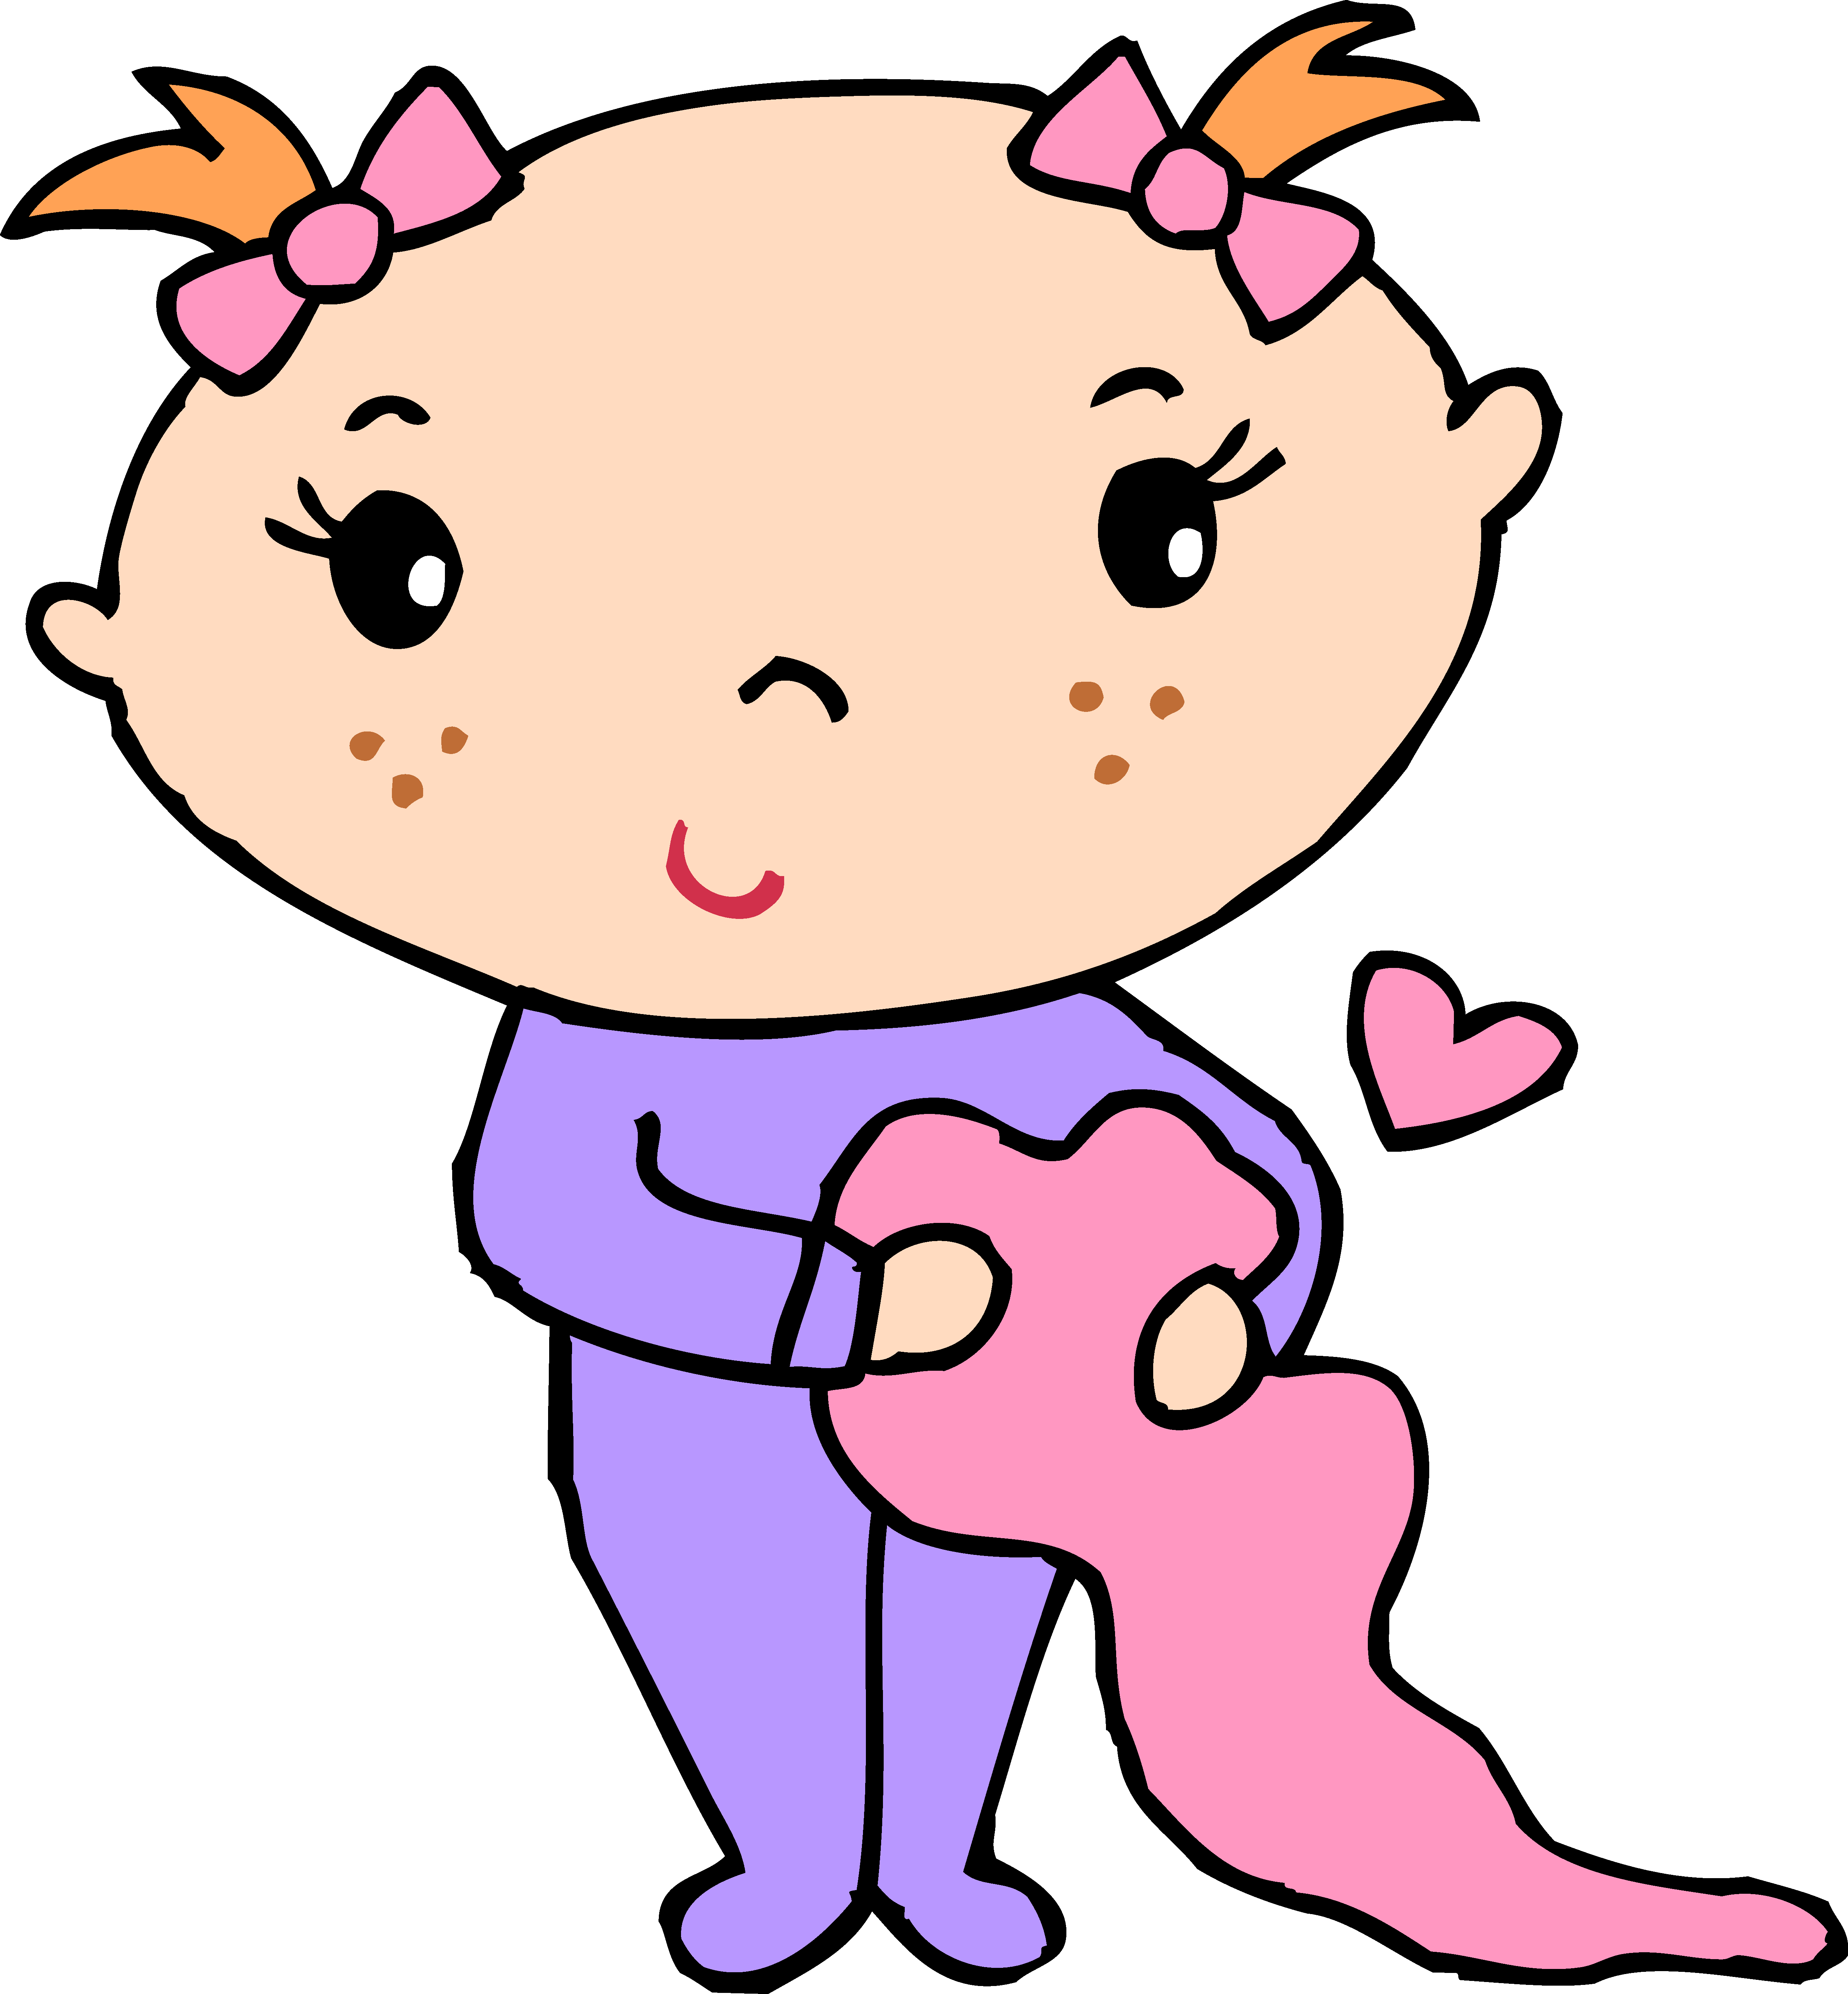 Funny baby girl cute baby images clip art - dbclipart.com